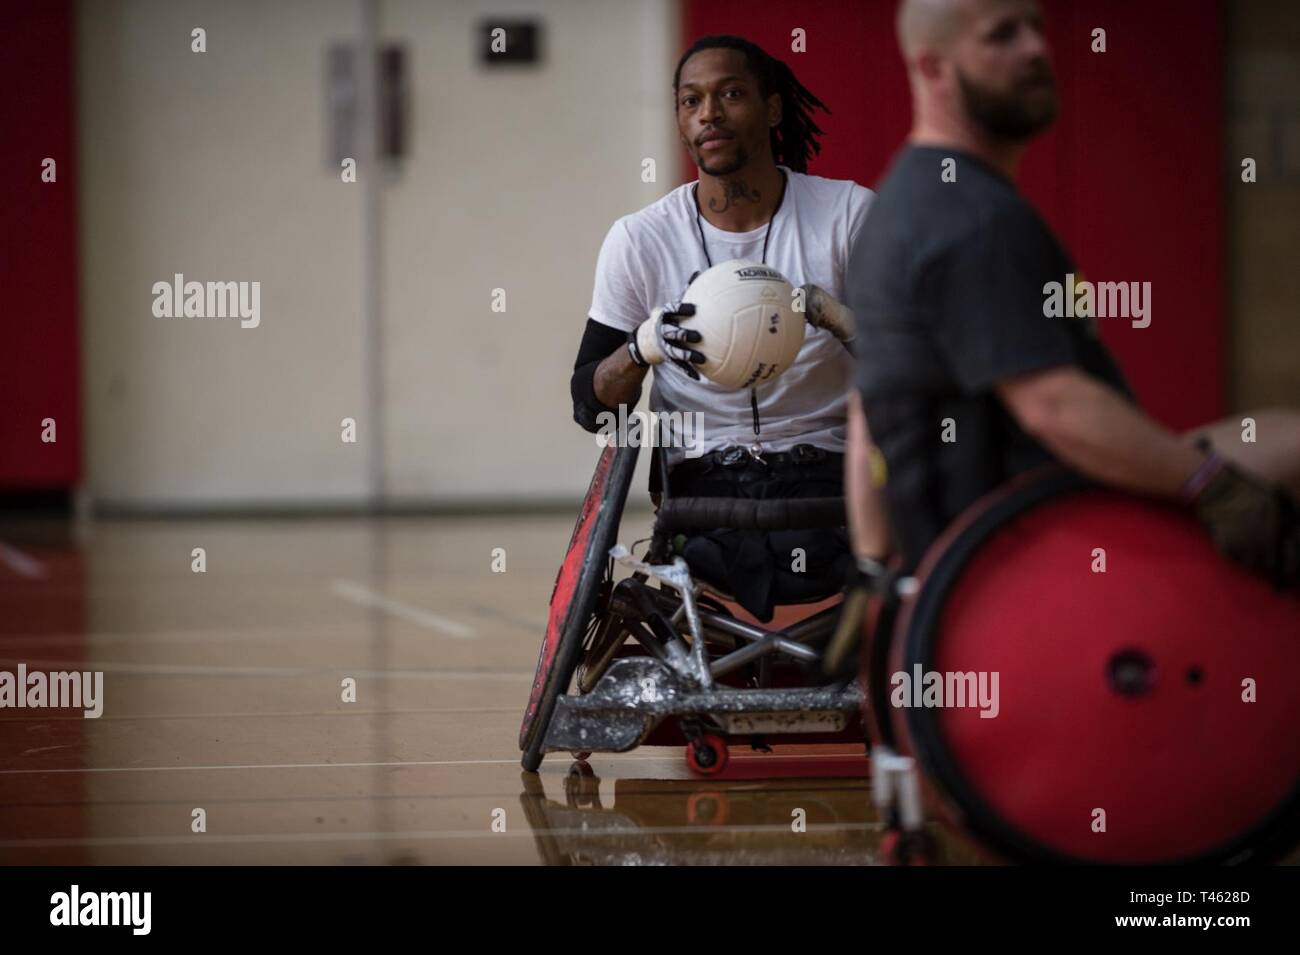 Wheelchair Rugby Coach Anthony McDaniel demonstrates wheelchair rugby techniques during the 2019 Marine Corps Trials at Marine Corps Base Camp Pendleton, California, Feb. 28. The Marine Corps Trials promotes recovery and rehabilitation through adaptive sports participation and develops camaraderie among recovering service members and veterans. Additionally, the competition is an opportunity for participants to demonstrate physical and mental achievements and serves as the primary venue to select Marine Corps participants for the DoD Warrior Games. Stock Photo